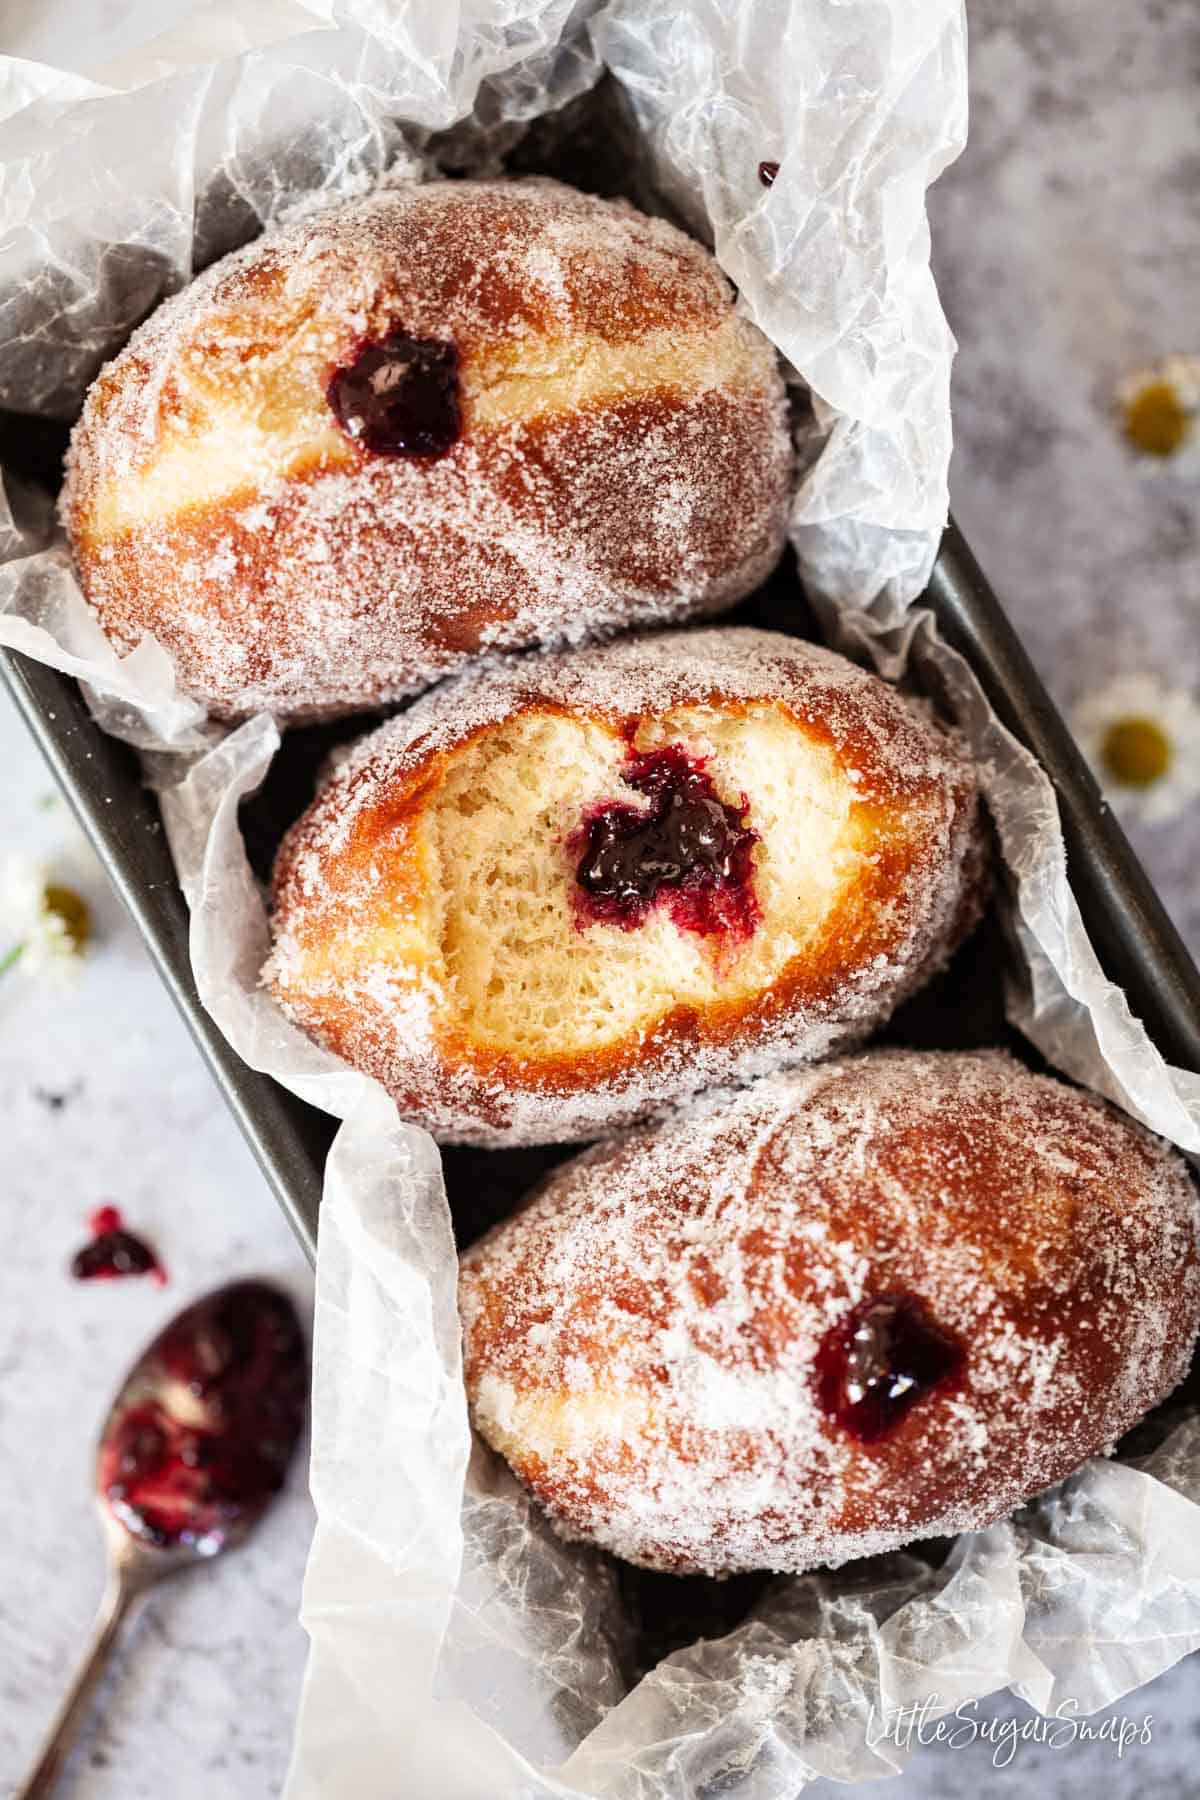 Three jam doughnuts in a loaf tin - one has been bitten into.